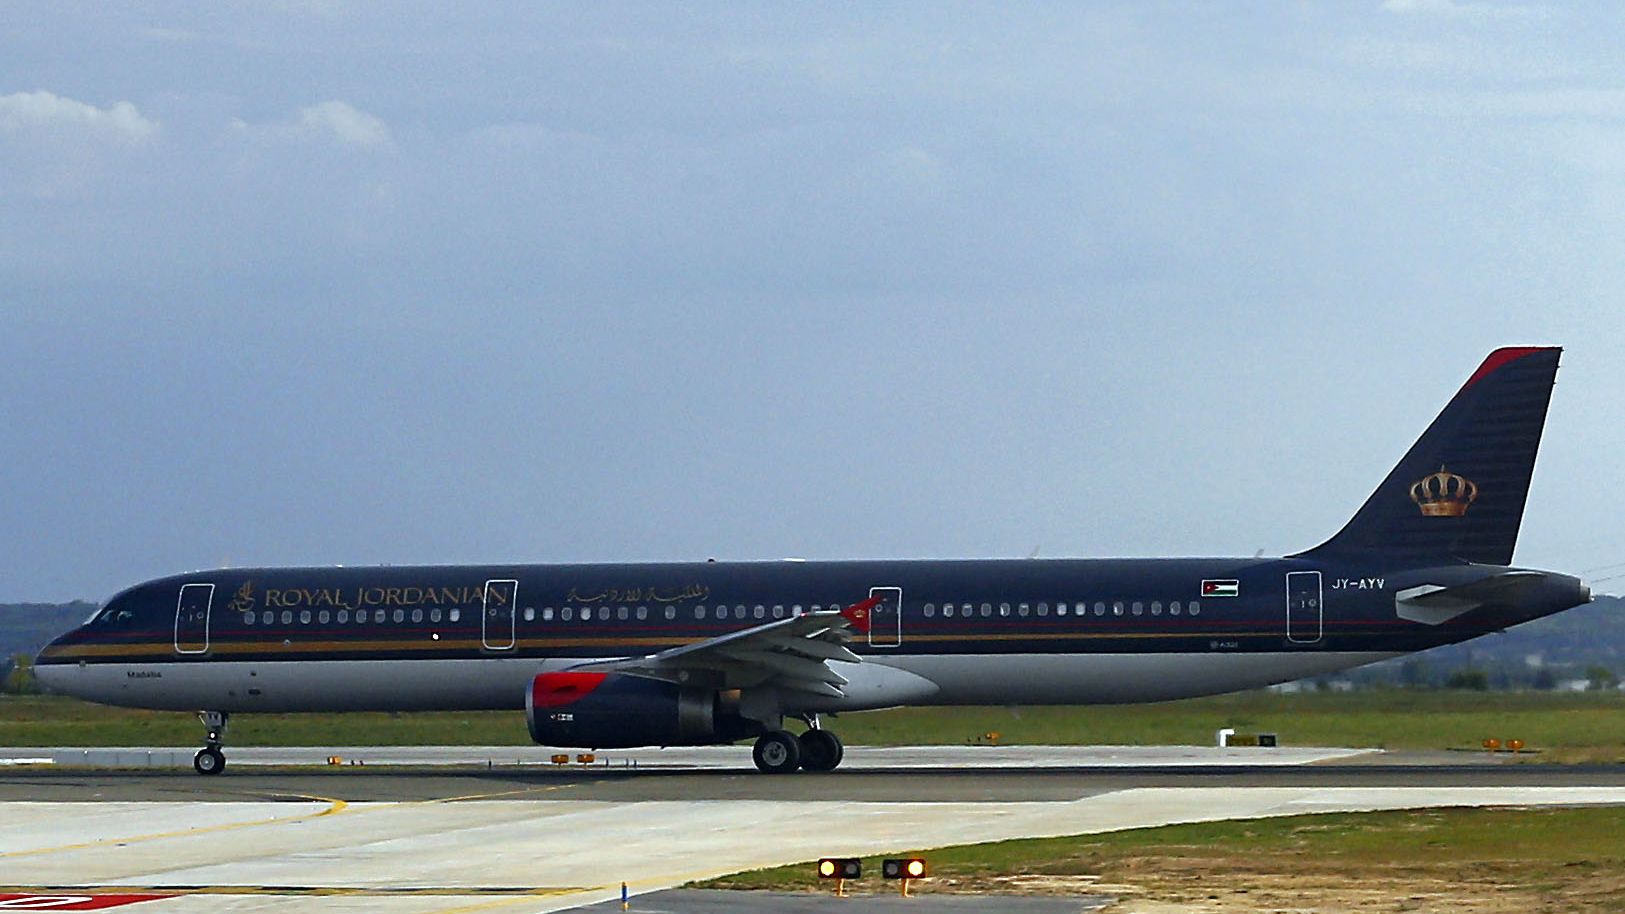 A Royal Jordanian Airlines aircraft in Paris in 2012. The airline also has referred to Donald Trump in past tweets.